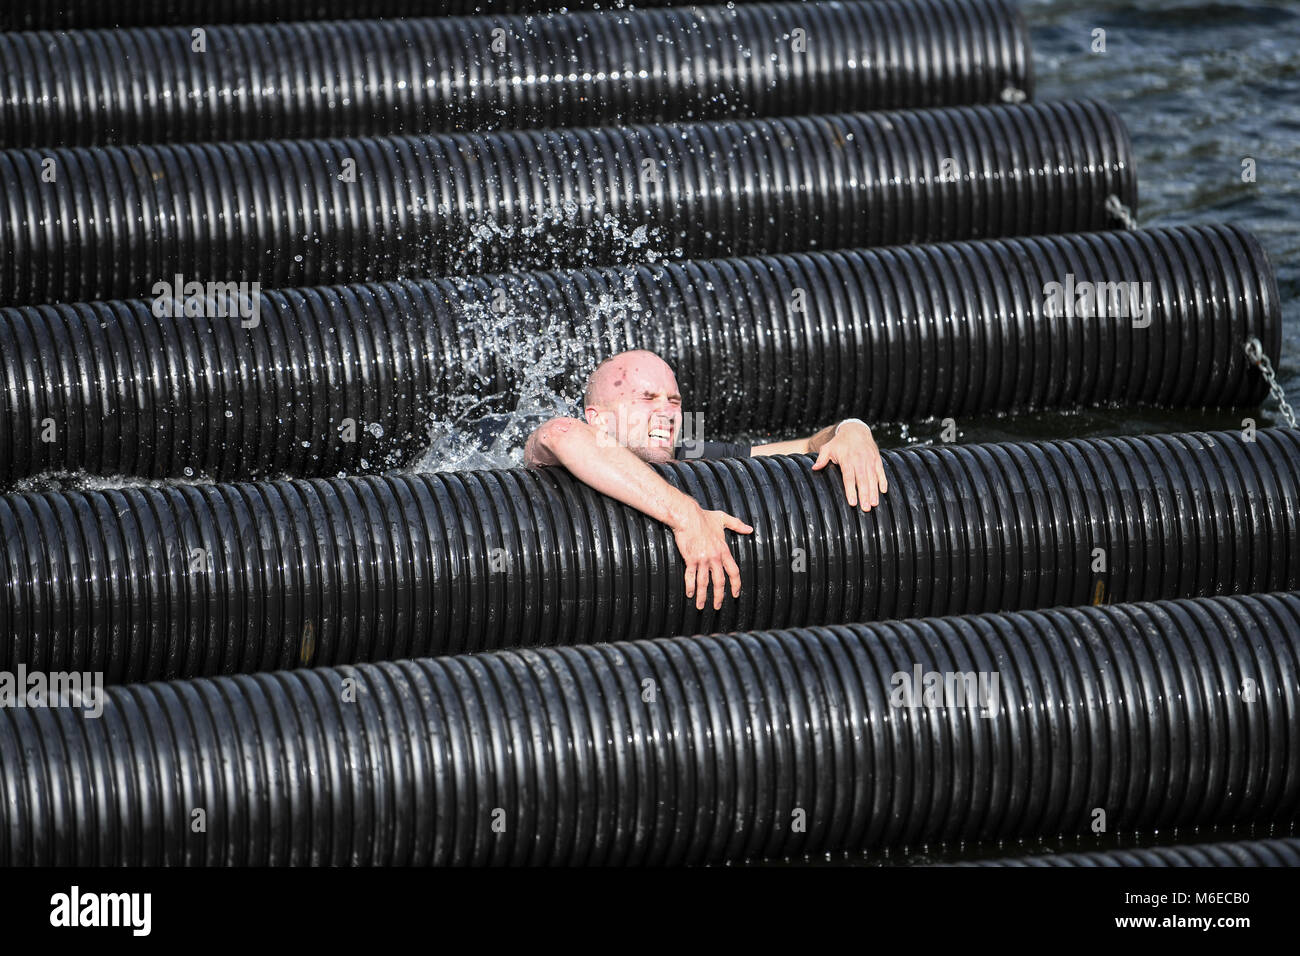 Participant crossing a water obstacle during Action run 2017 obstacle race run in the city of Norrköping, Sweden in September 2017 Stock Photo